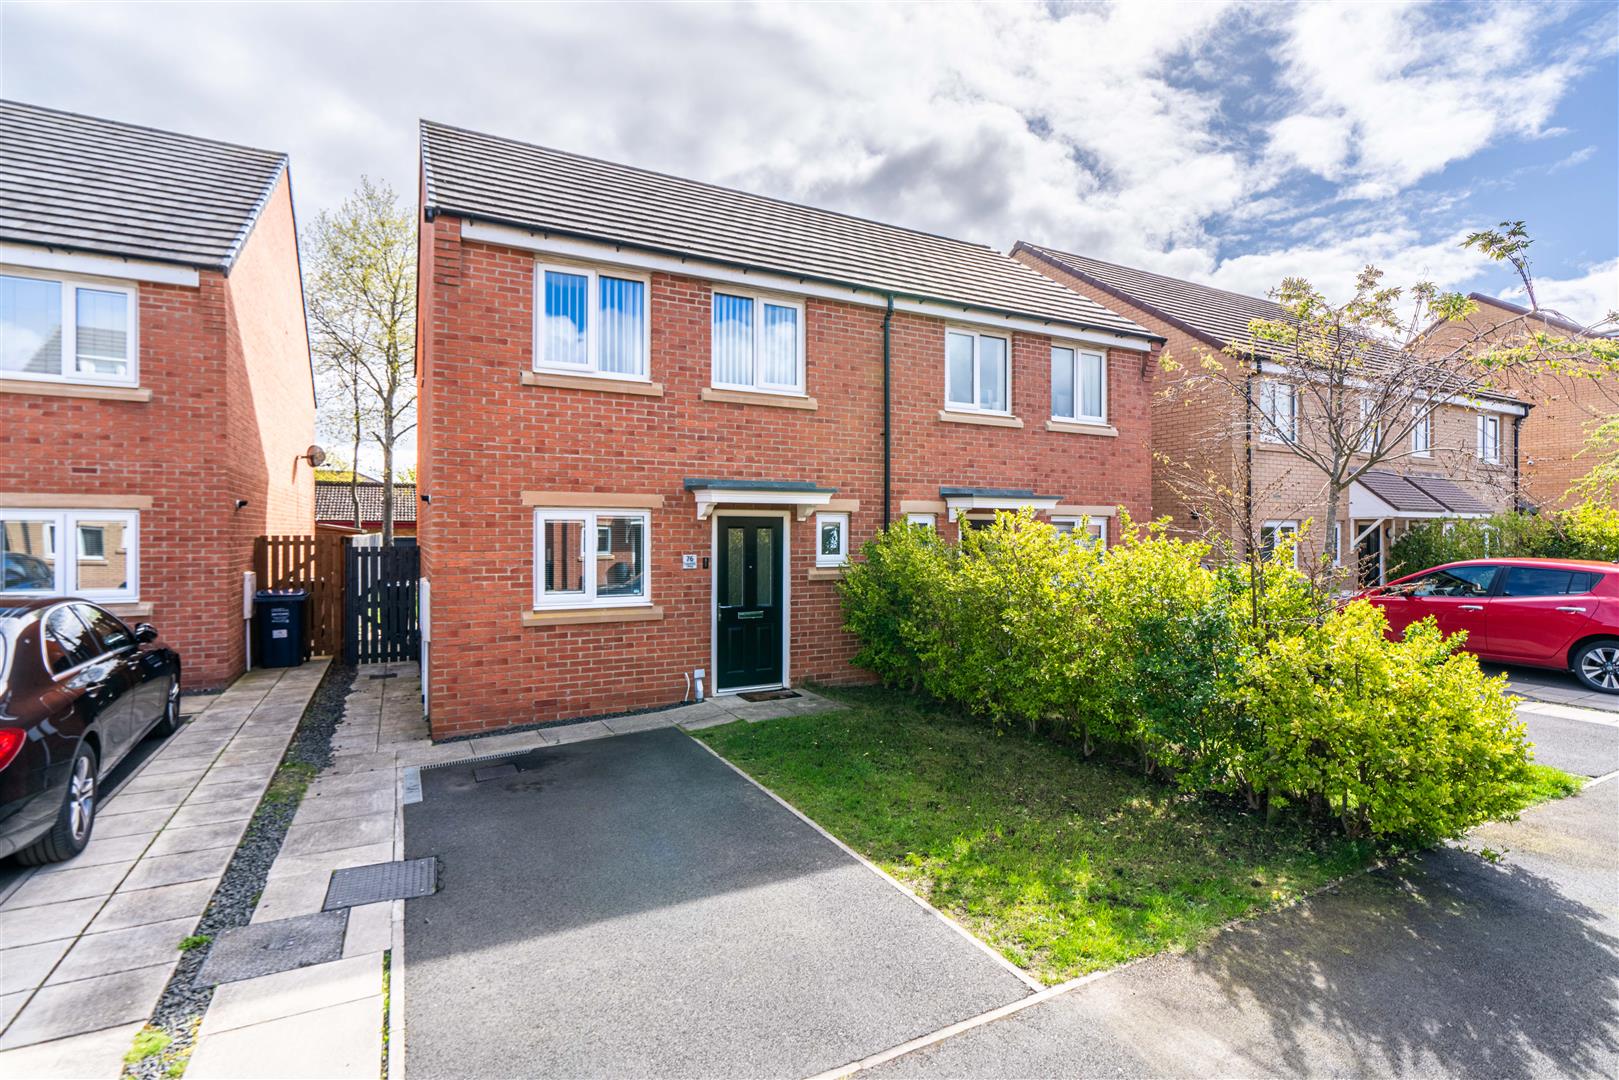 2 bed semi-detached house for sale in Lazonby Way, Newcastle Upon Tyne, NE5 